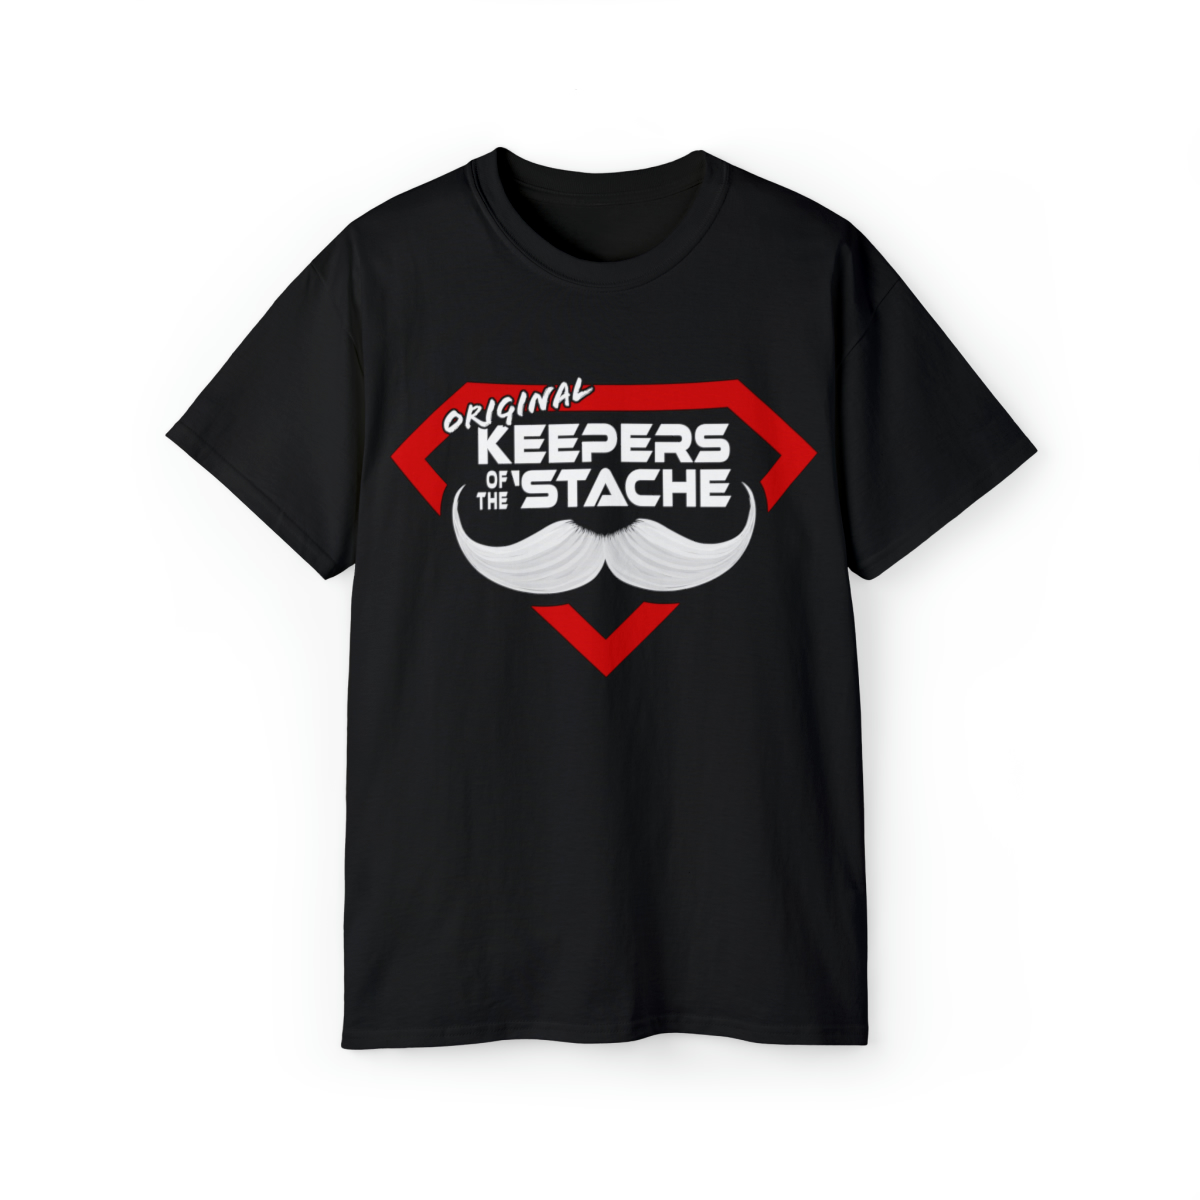 Original Keepers of the 'Stache Unisex Ultra Cotton Tee